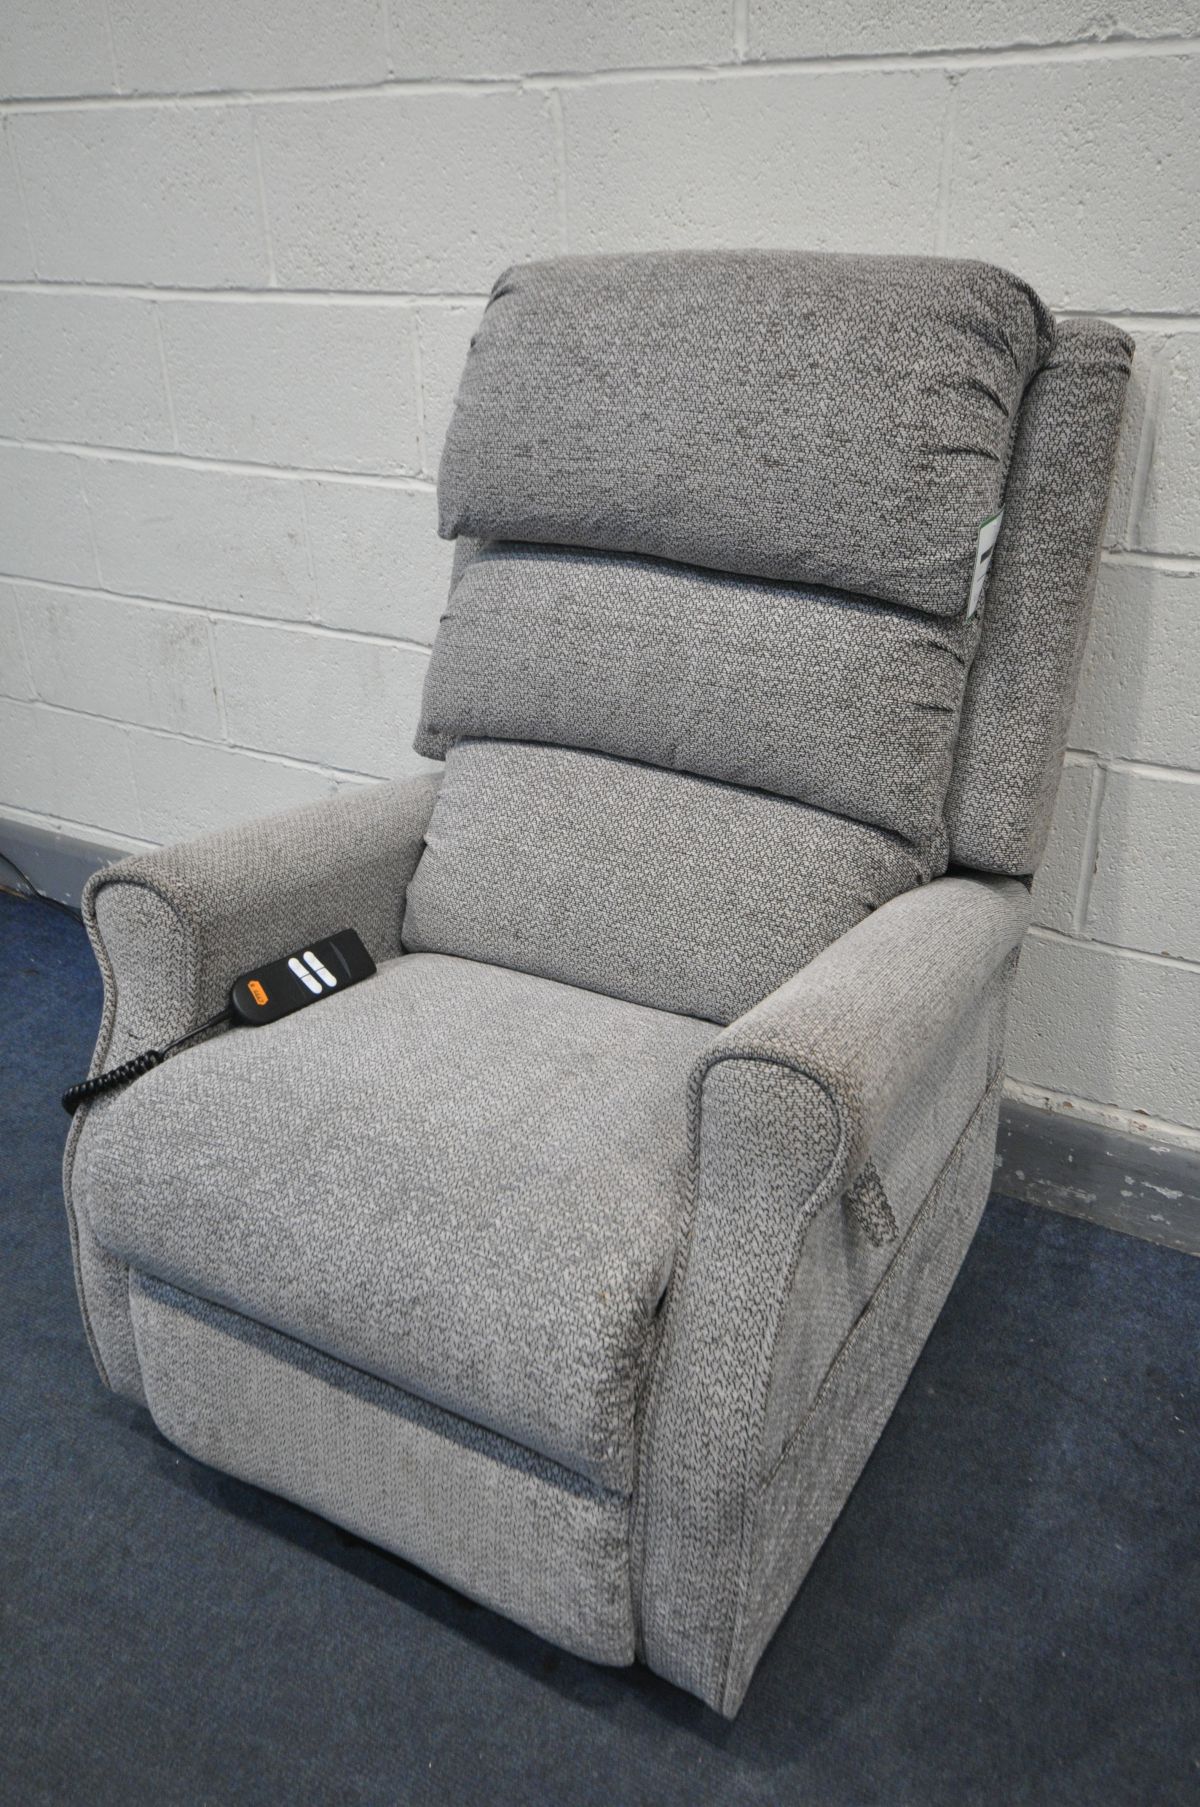 AN ELECTRIC RISE AND RECLINE ARMCHAIR (PAT pass and working)